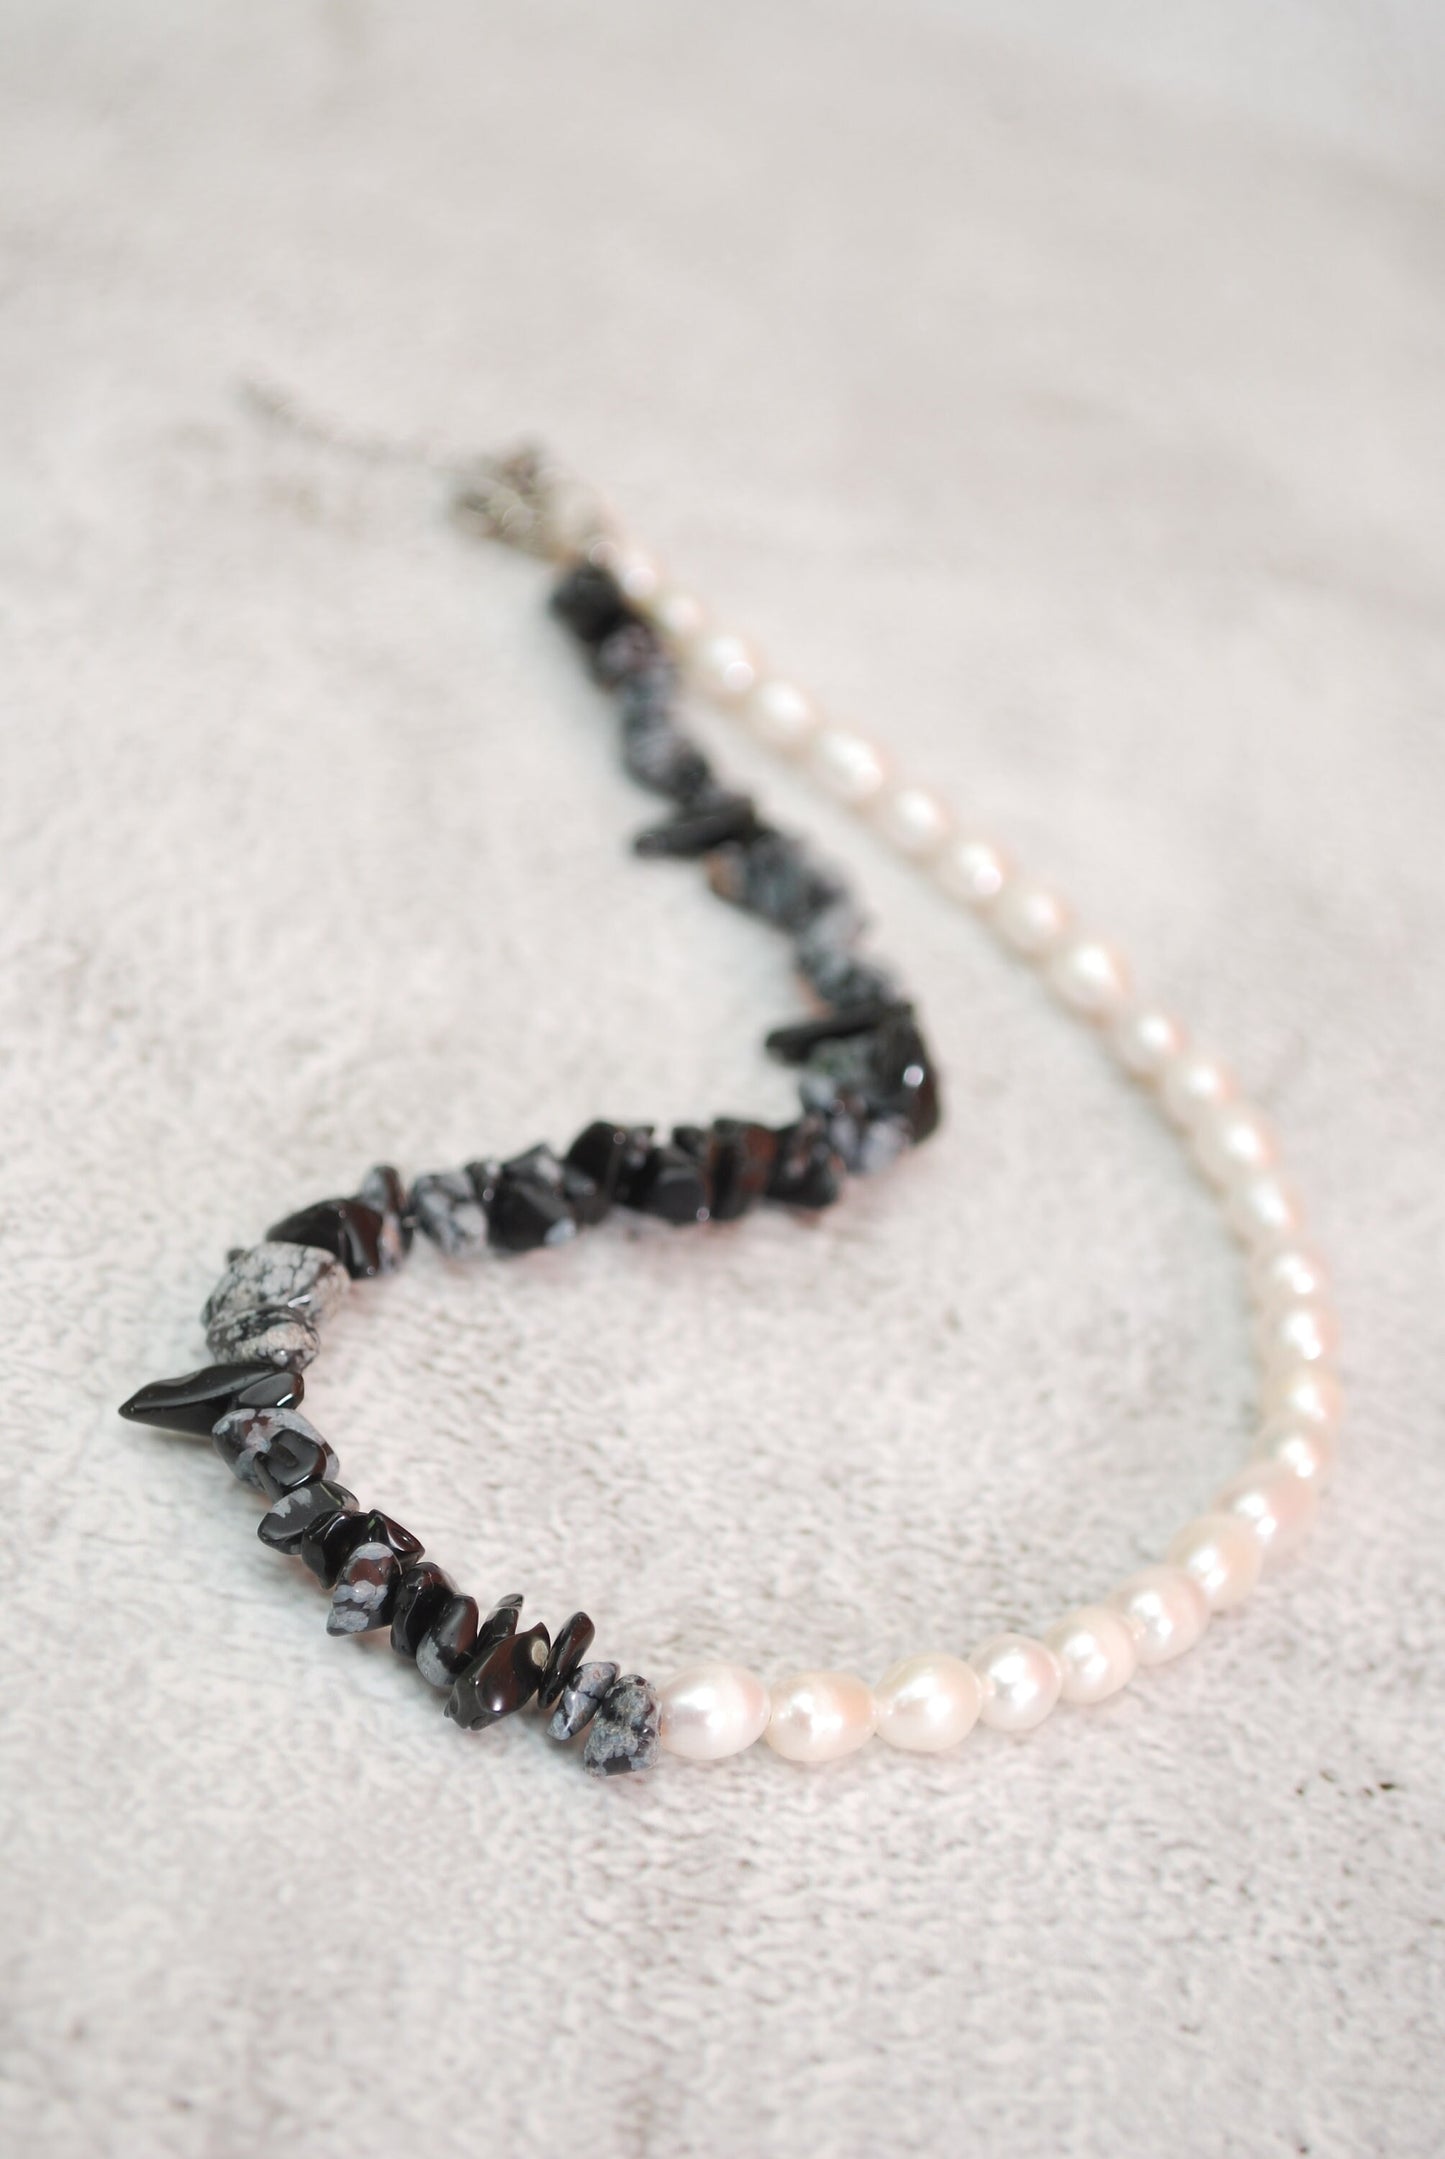 Back and white necklace, half freshwater pearl & half black stone beads choker necklace, 46cm 18"